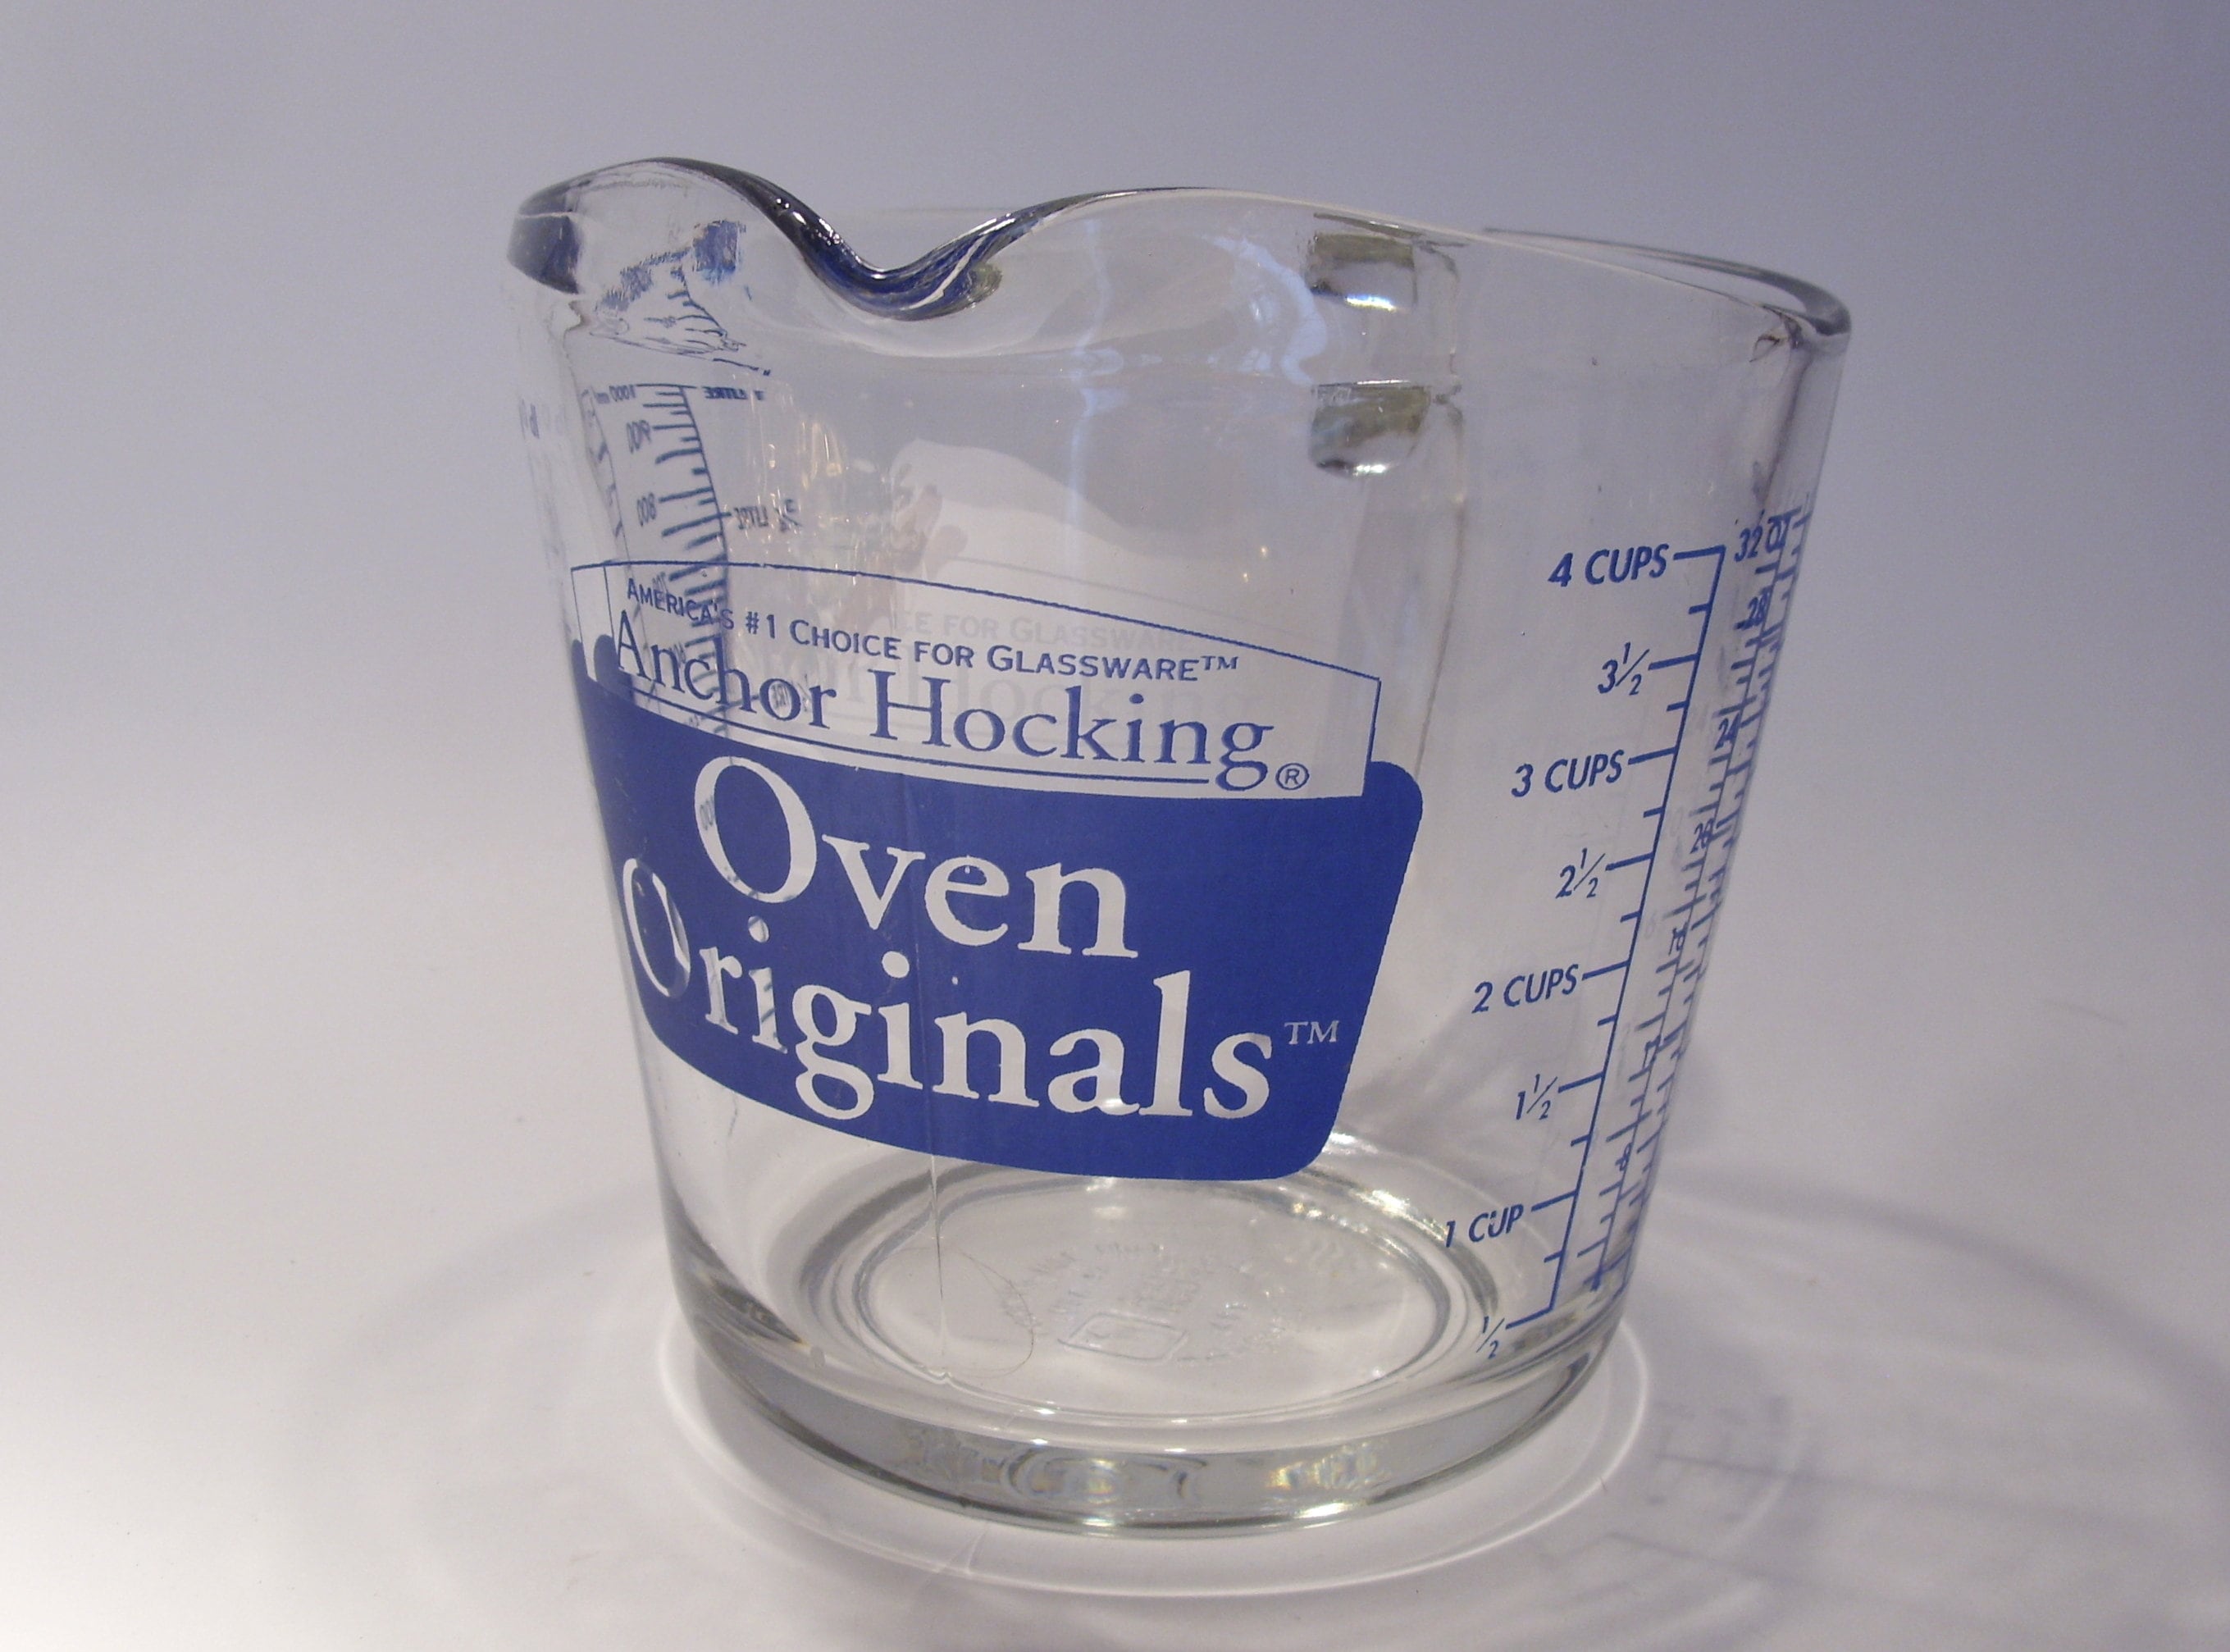 Anchor Hocking Glass Measuring Cup, 4 Cup